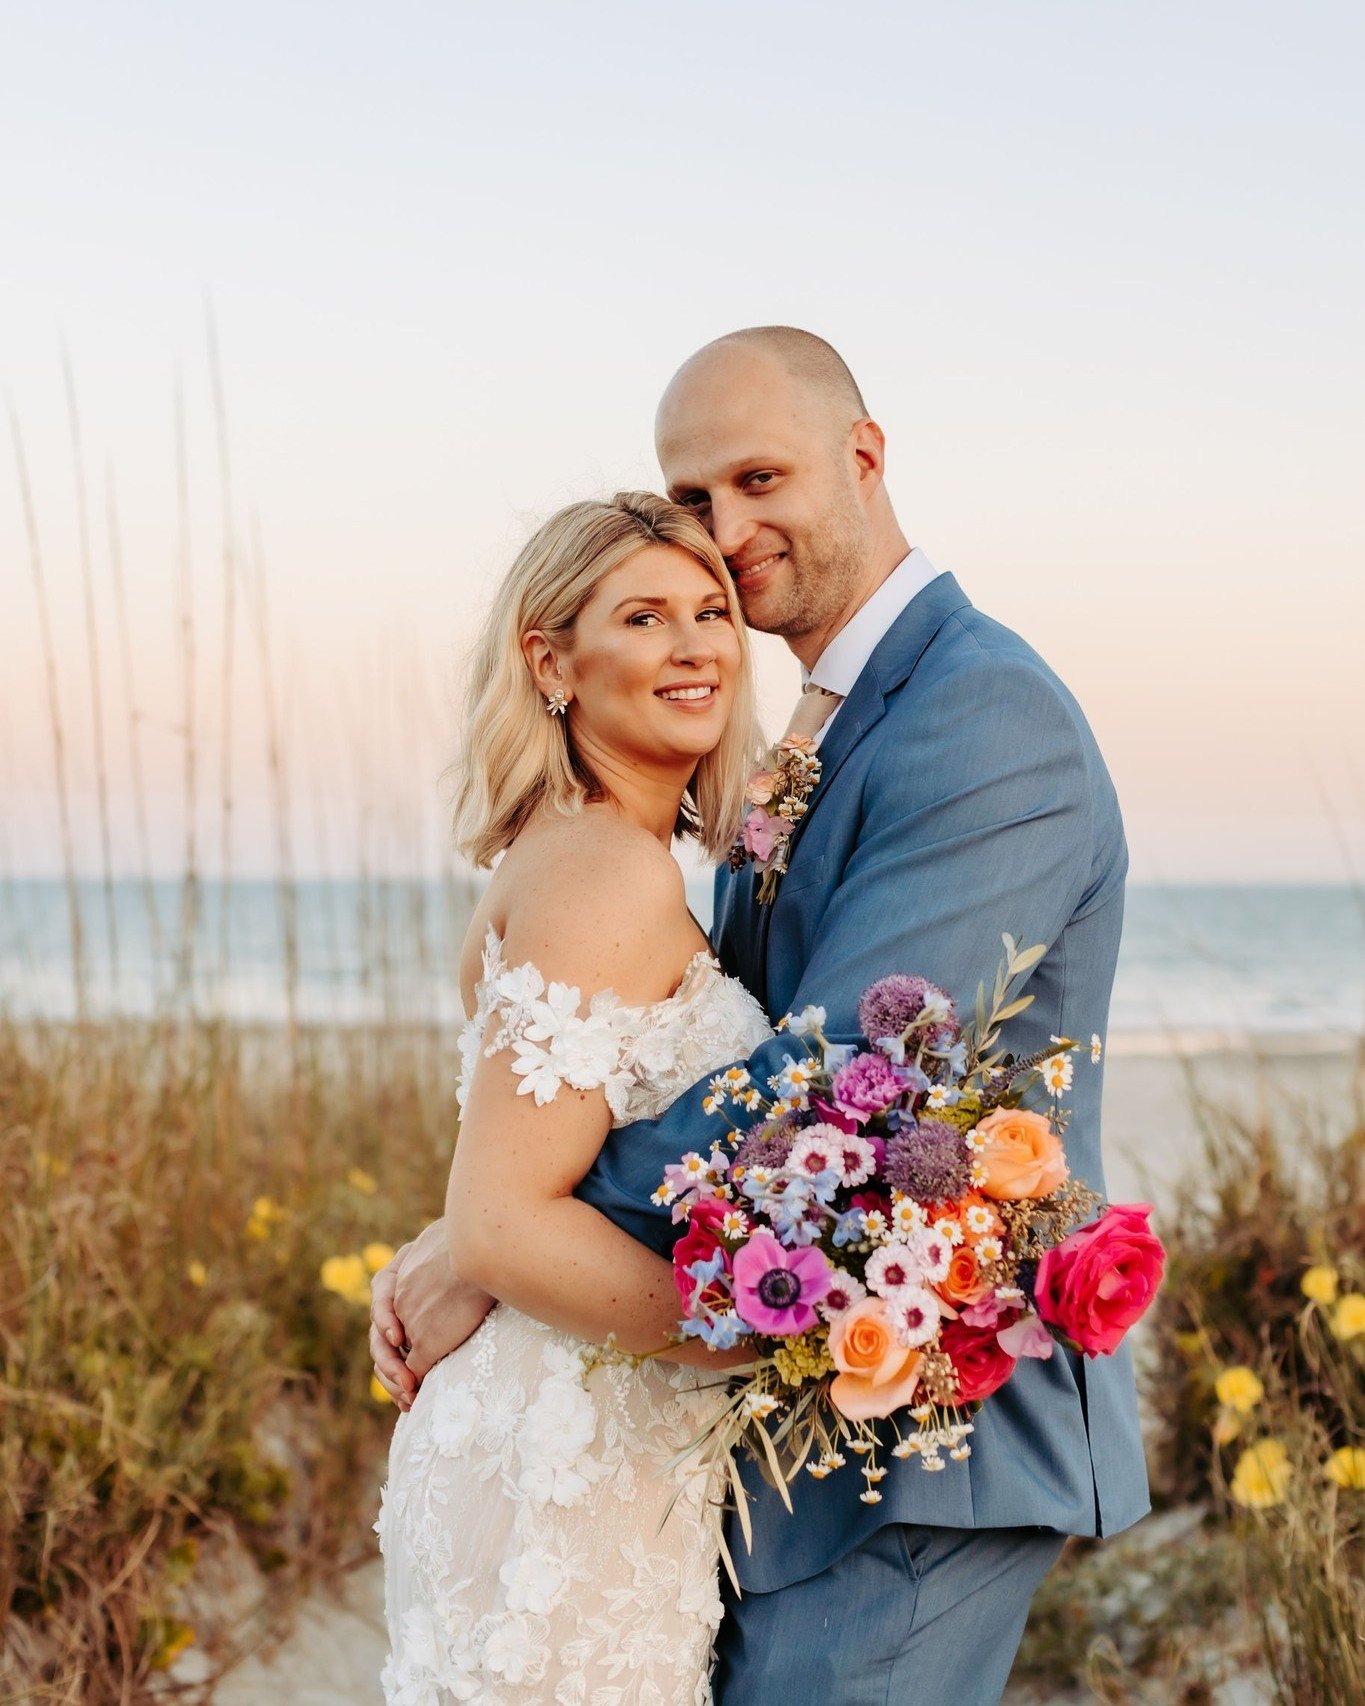 Capturing the essence of coastal charm and the vivid spirit of love, these beach wedding blooms radiate with vibrant energy and unmatched beauty. Every detail of this special day is adorned with bright, bold florals...from the gorgeous arch to the br